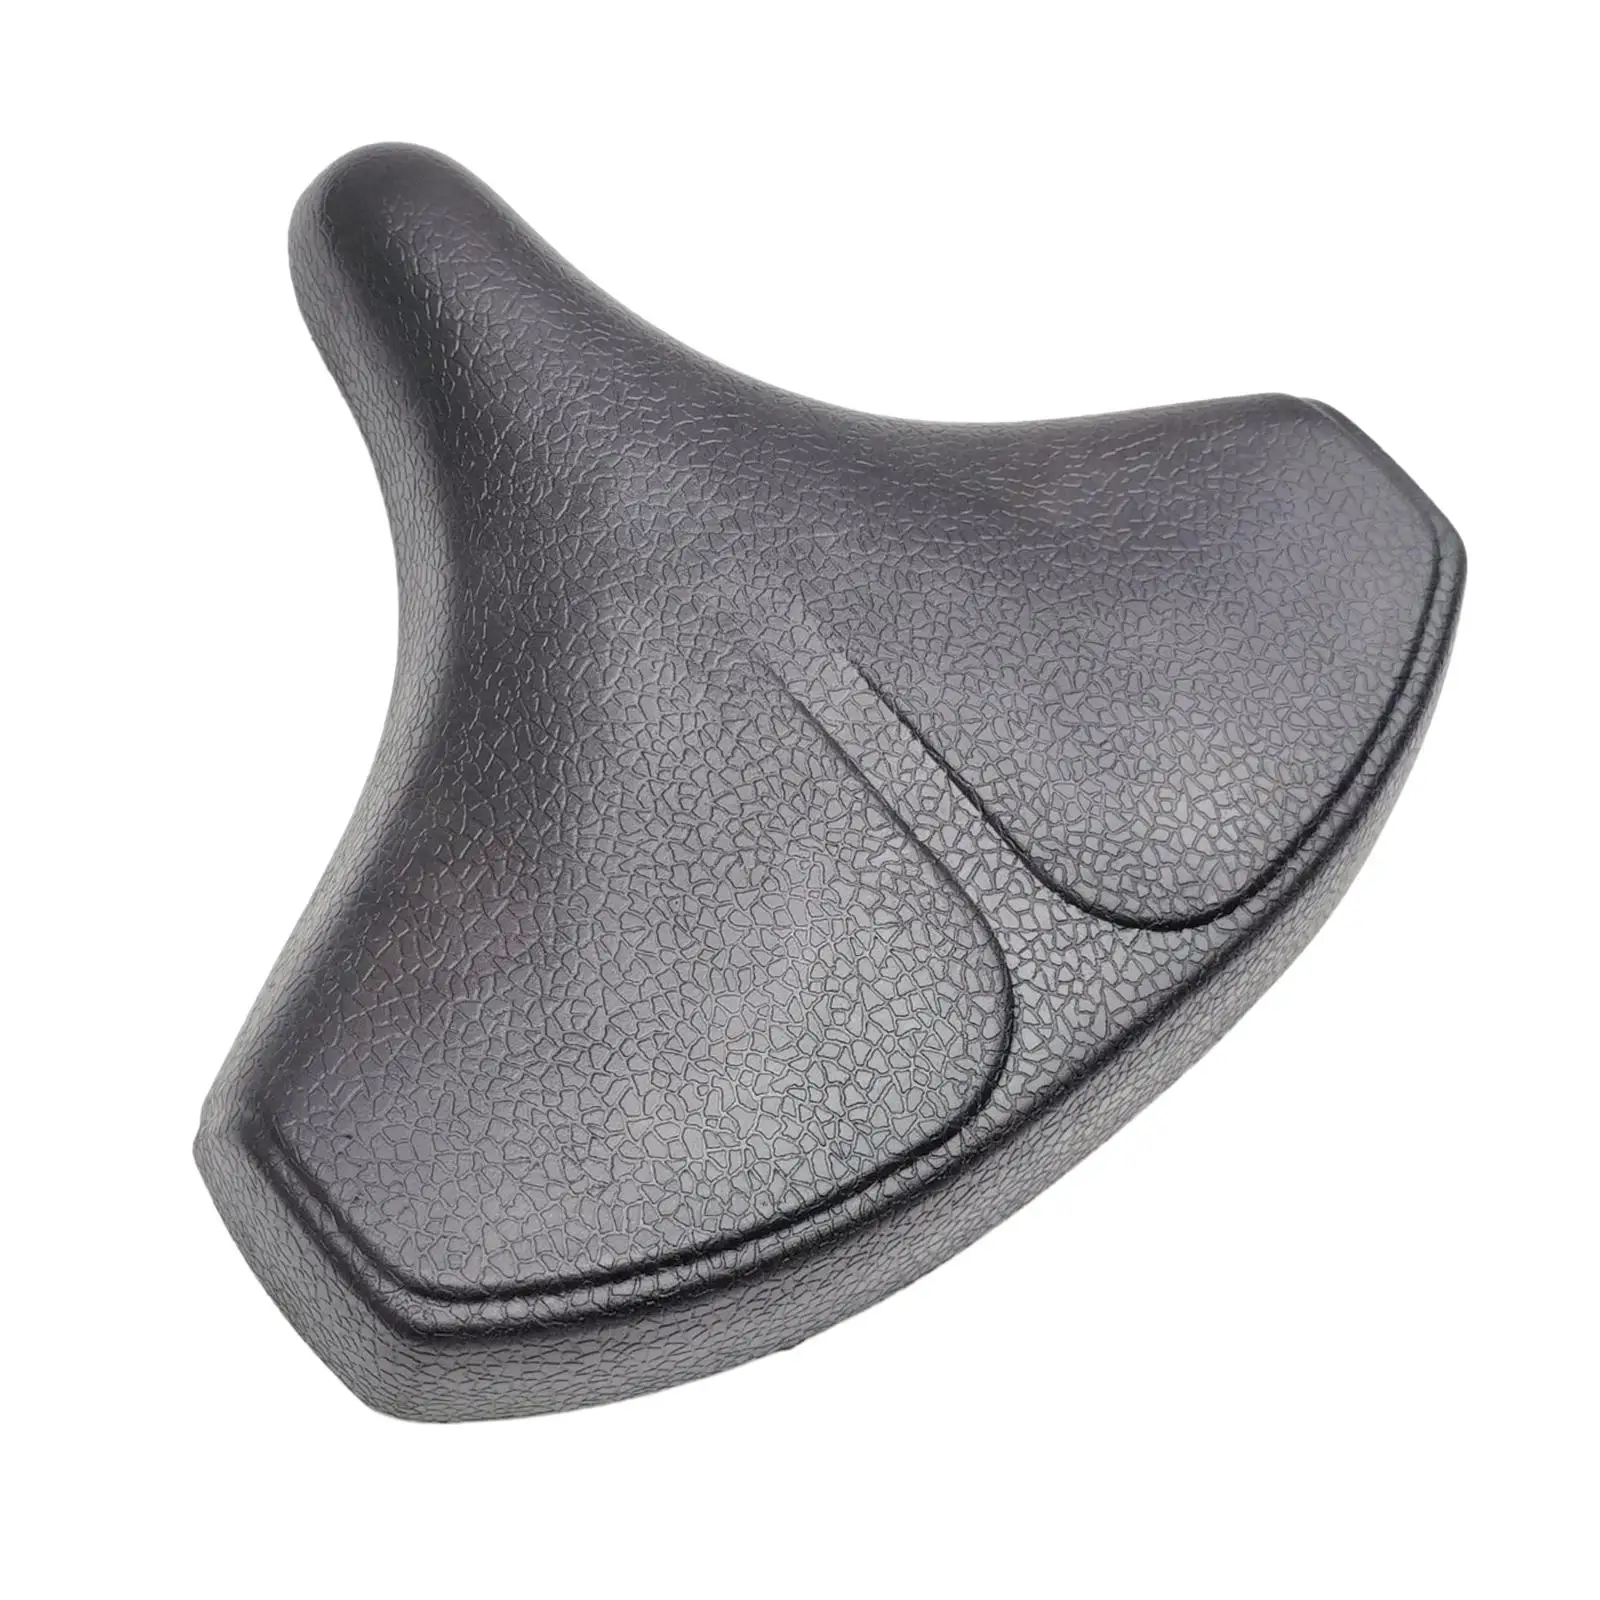 Portable Exercise Bike Saddle Seat Cushion Durable Thick PU for Workout